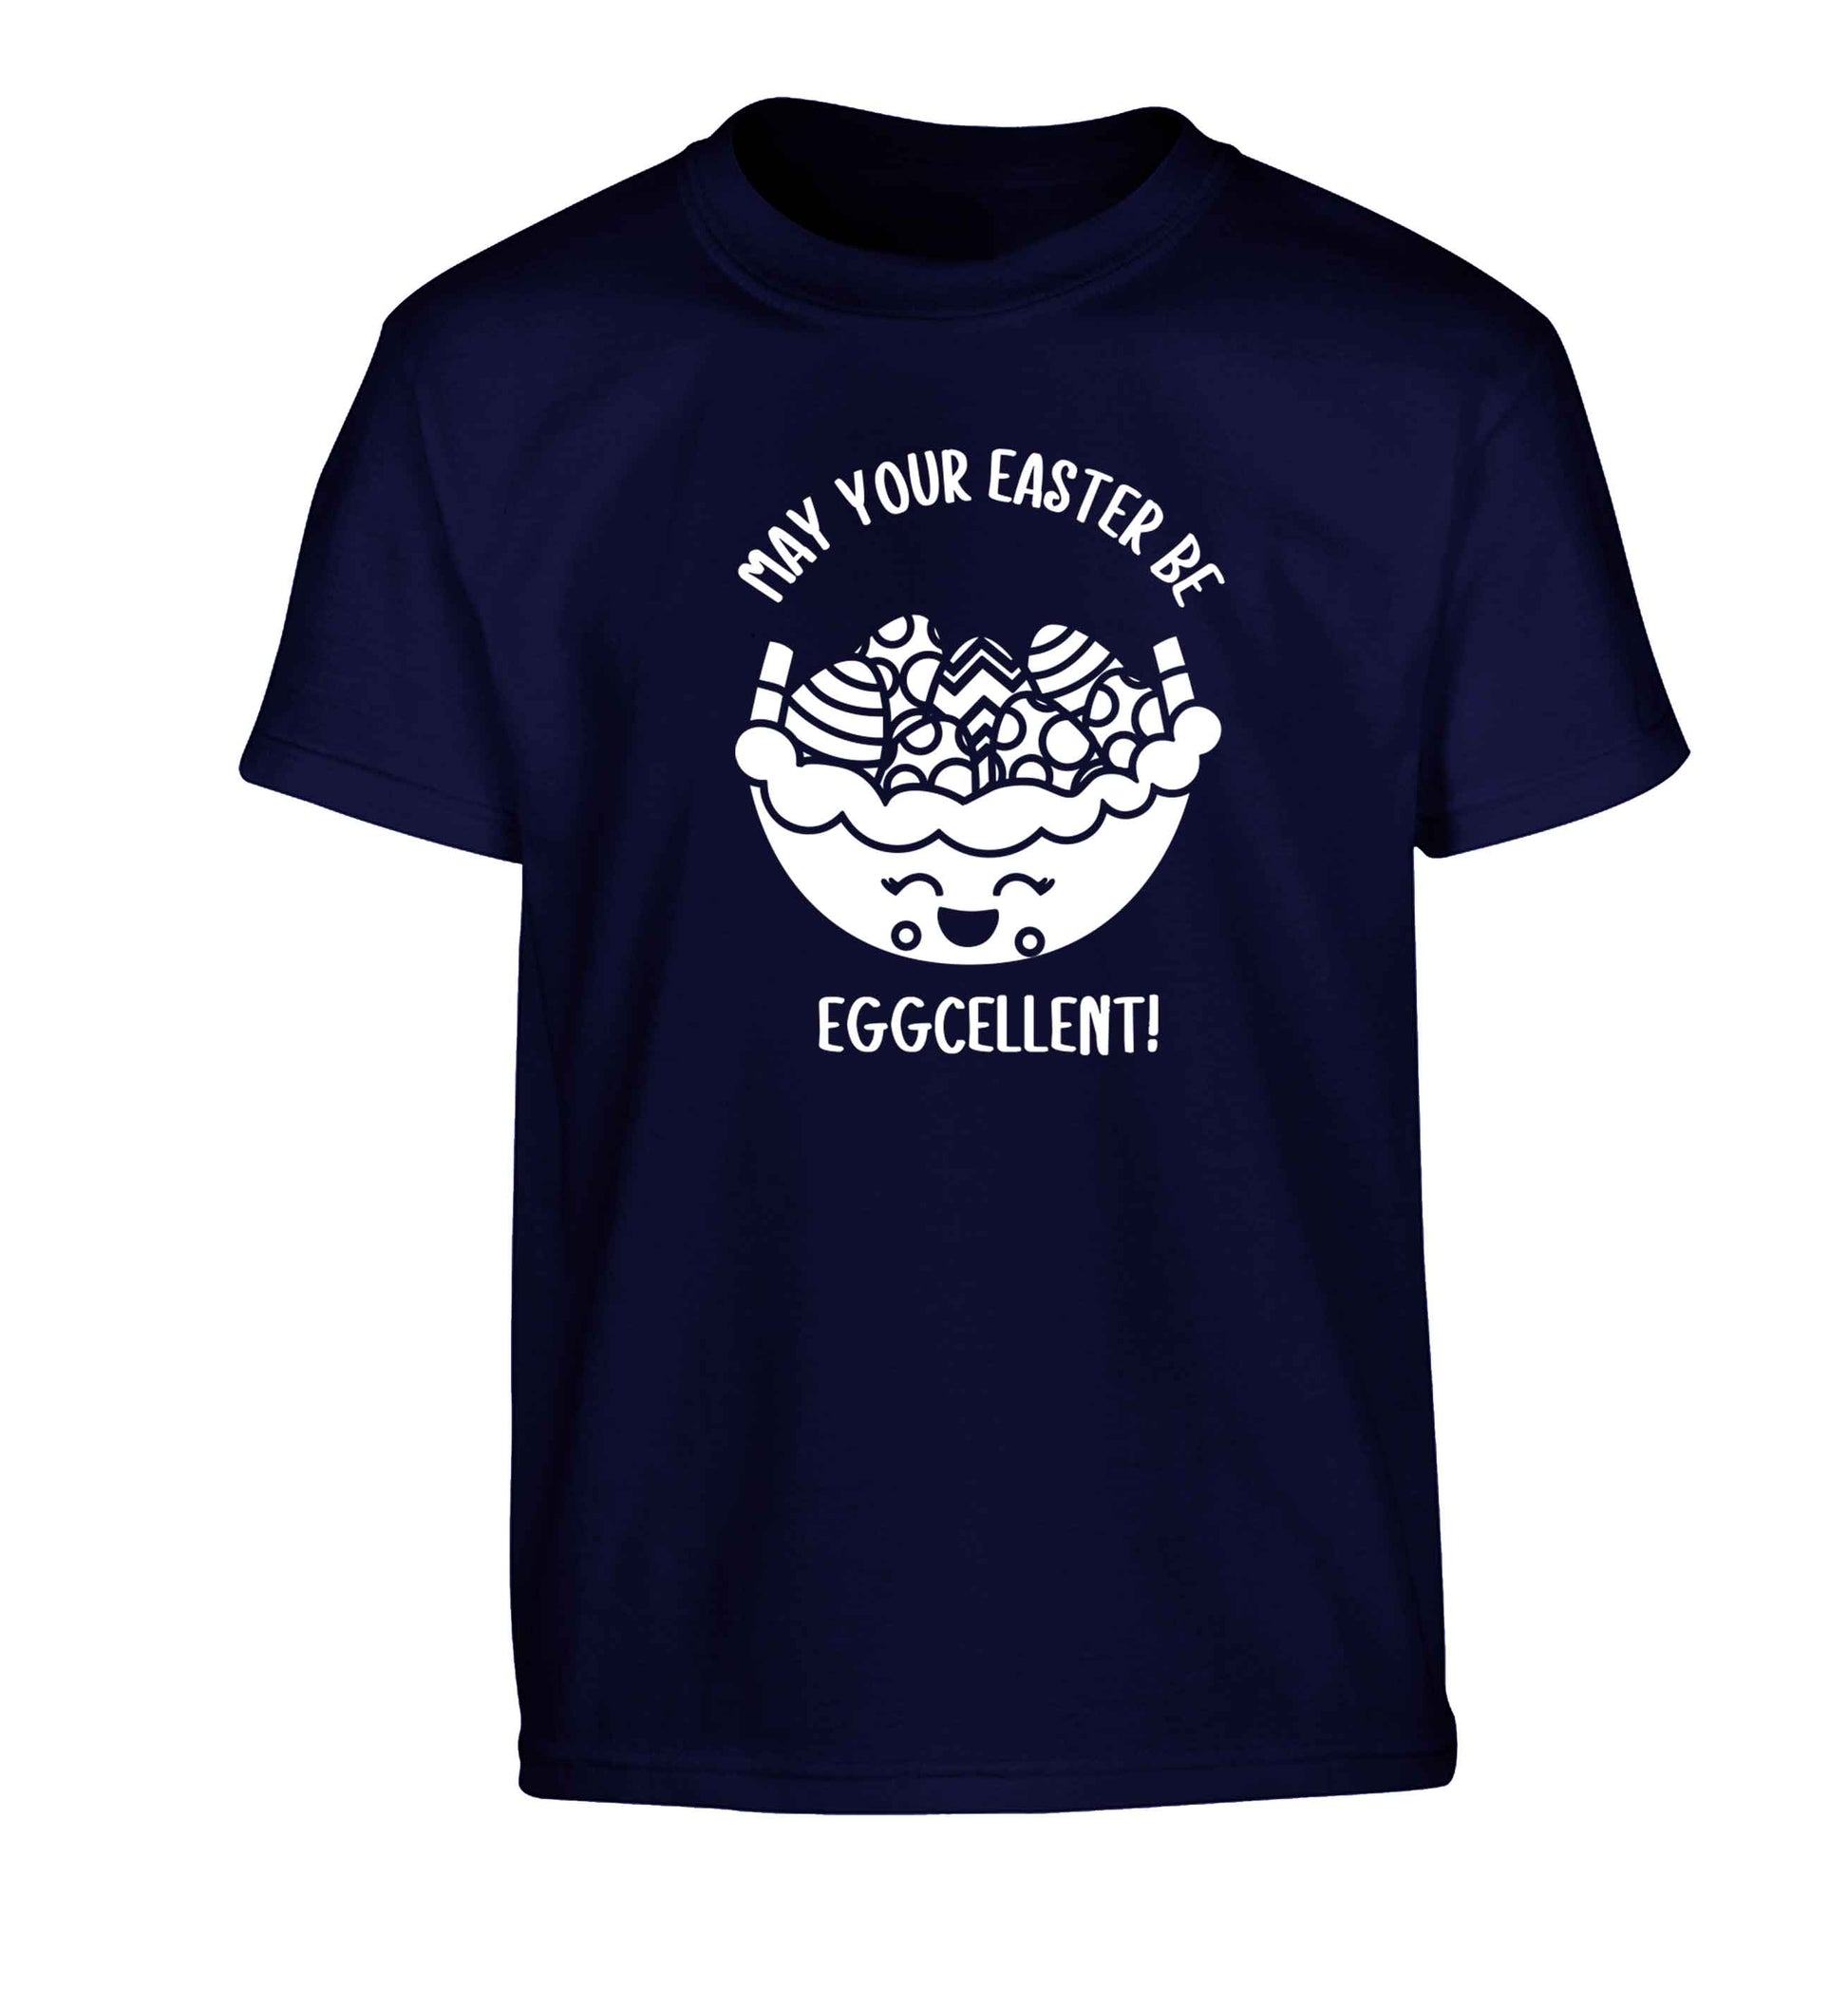 May your Easter be eggcellent Children's navy Tshirt 12-13 Years